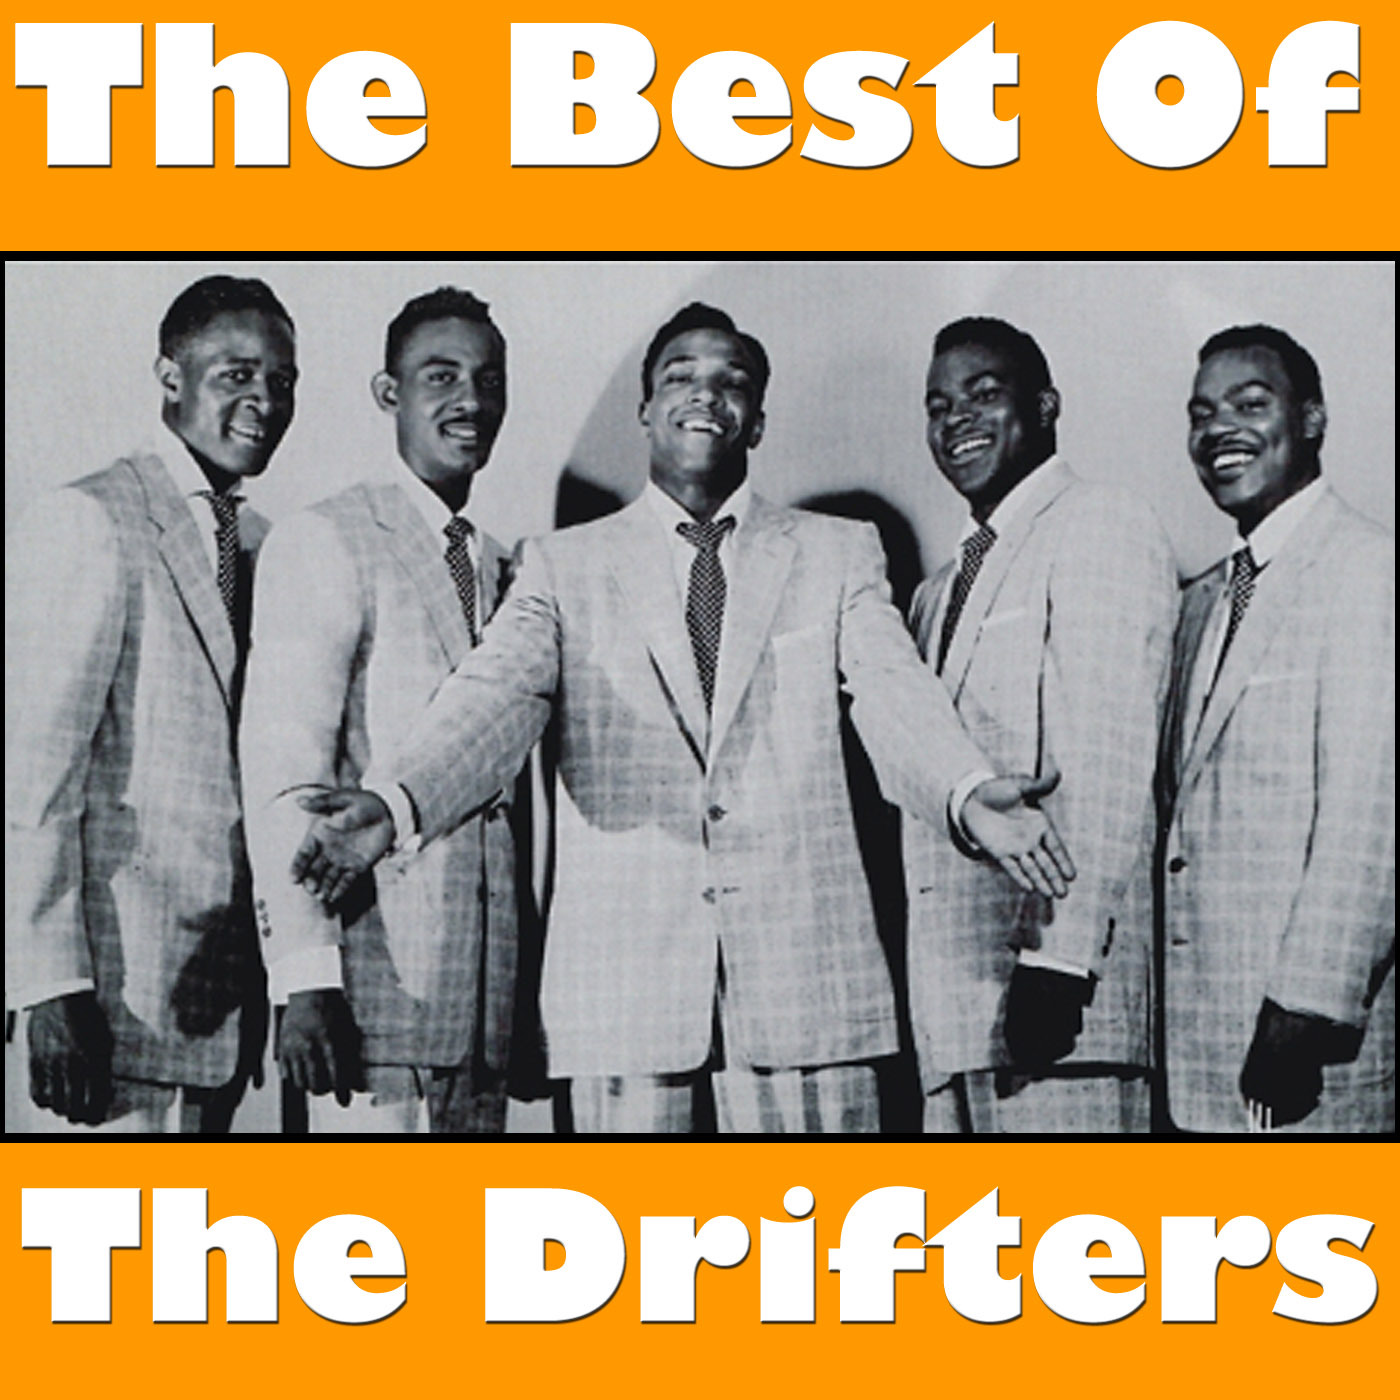 The Best of The Drifters